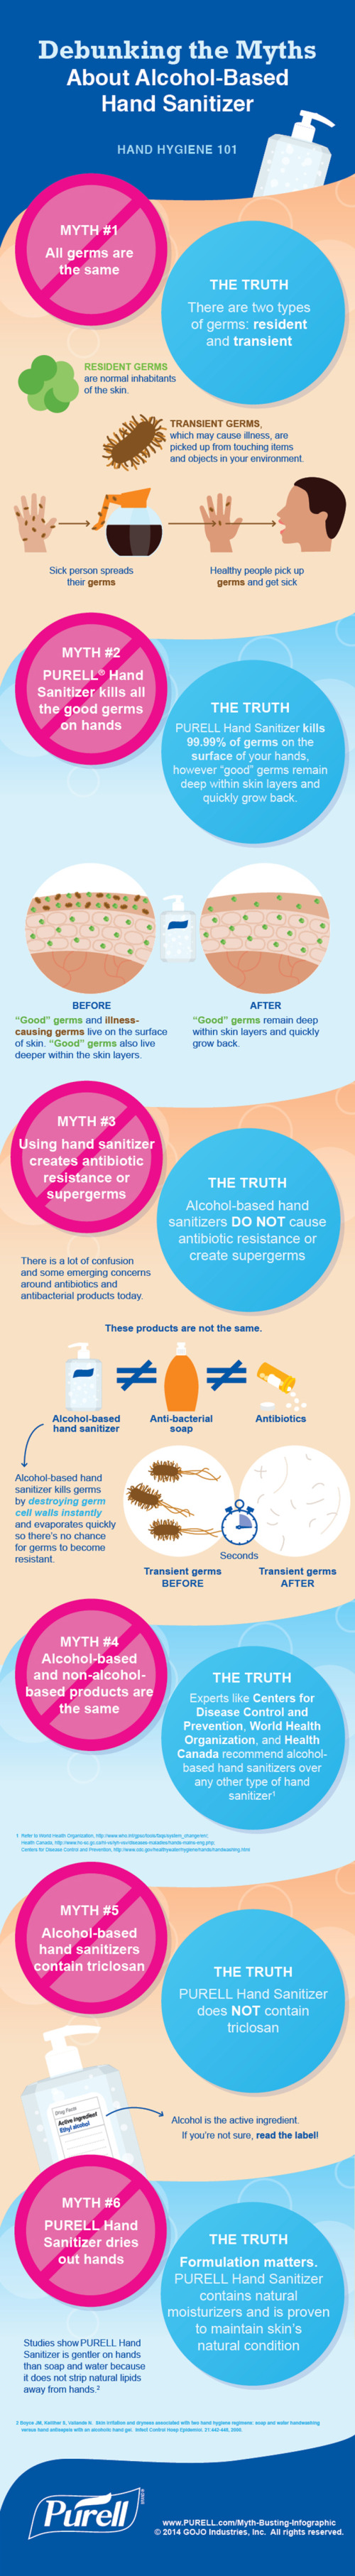 Busting Myths About Hand Sanitizers infographic